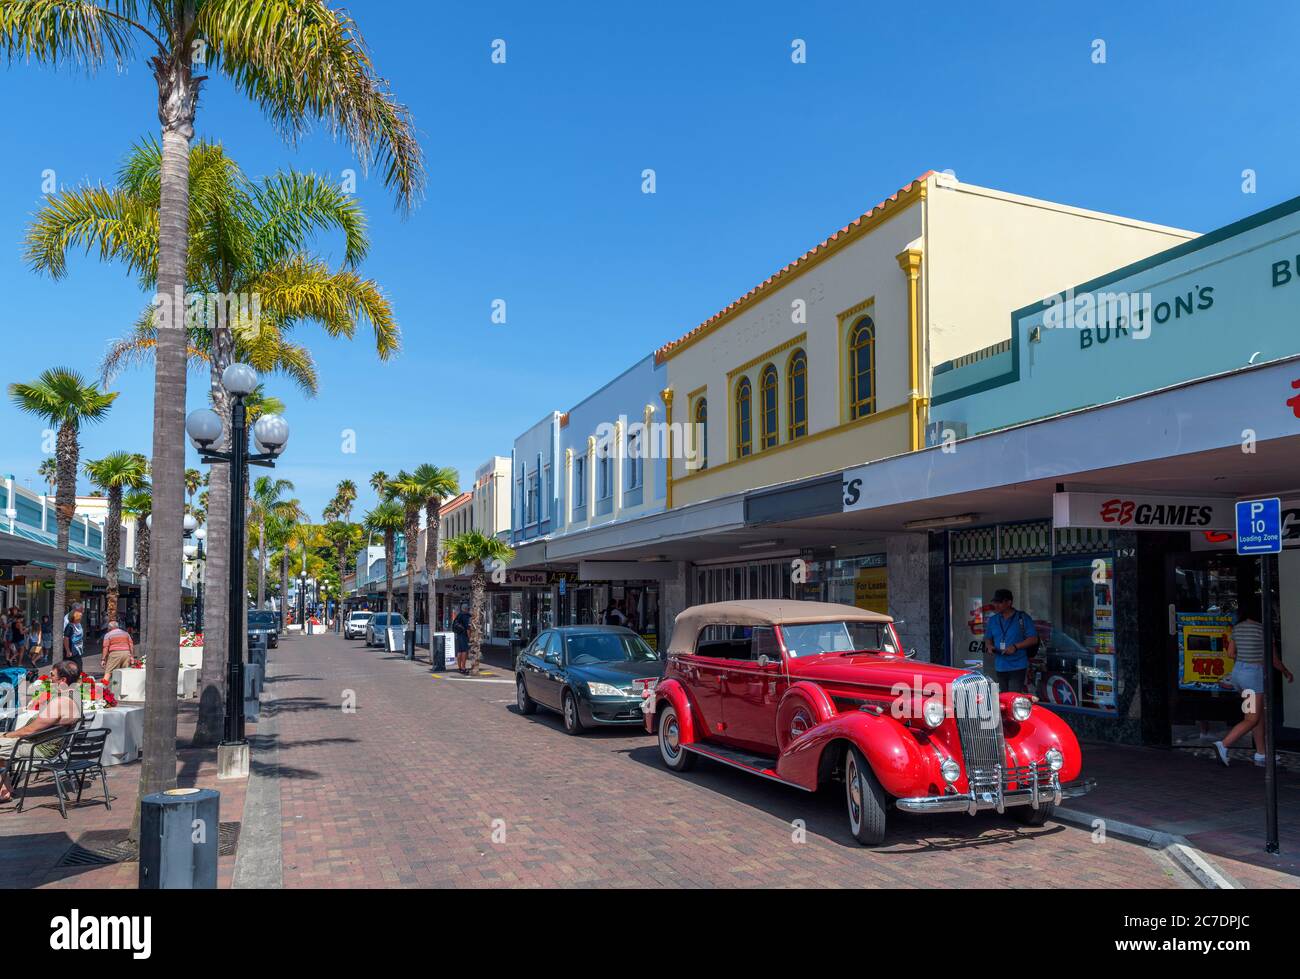 Cafes and shops on Emerson Street in the art deco district of downtown Napier, North Island, New Zealand Stock Photo